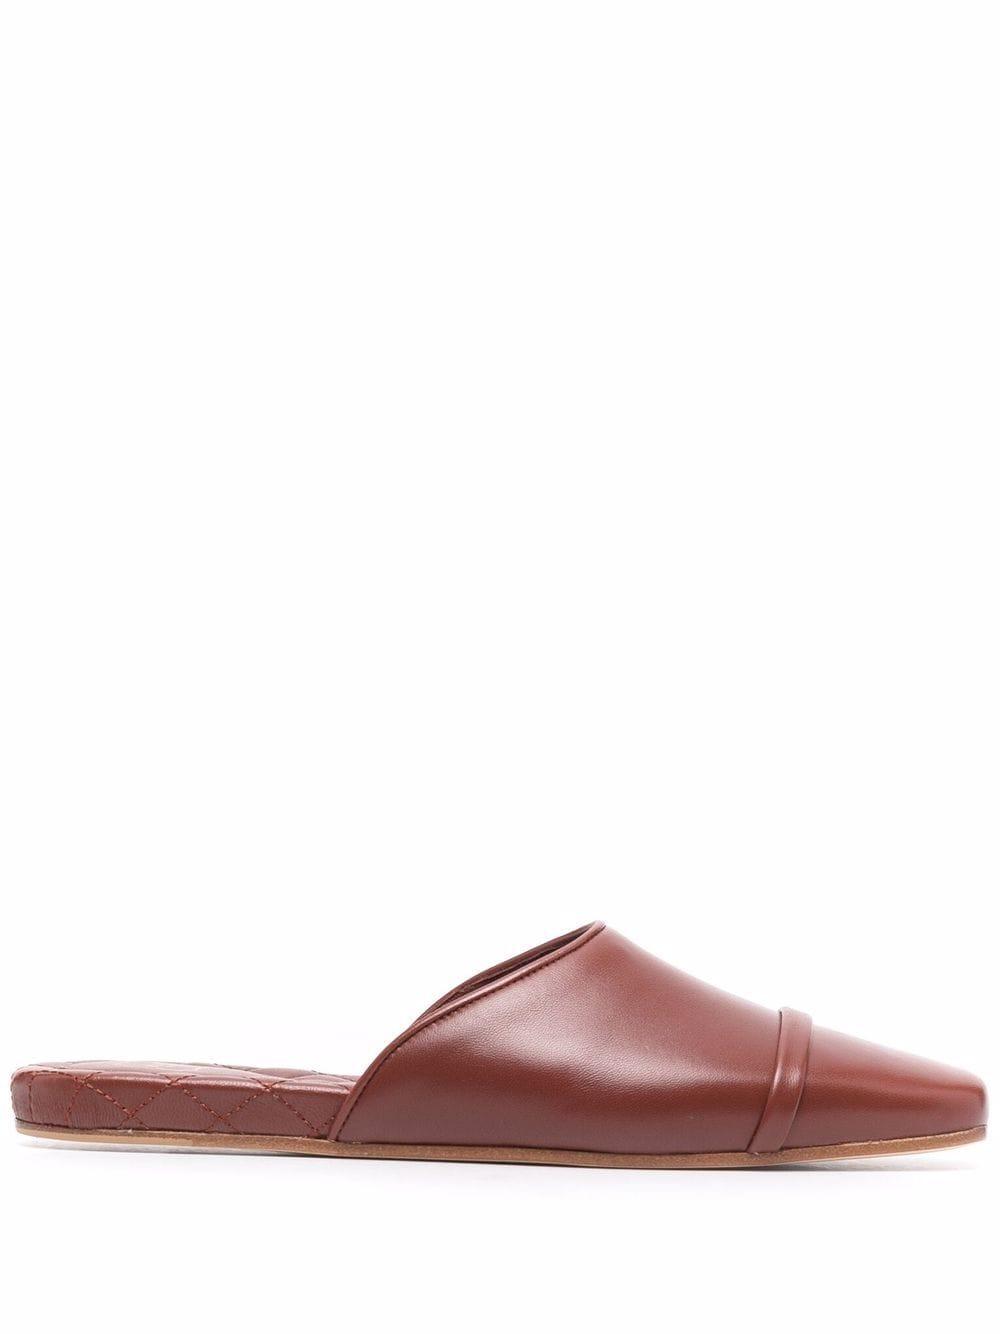 Malone Souliers Leather Rene 055 Mules in Brown | Lyst